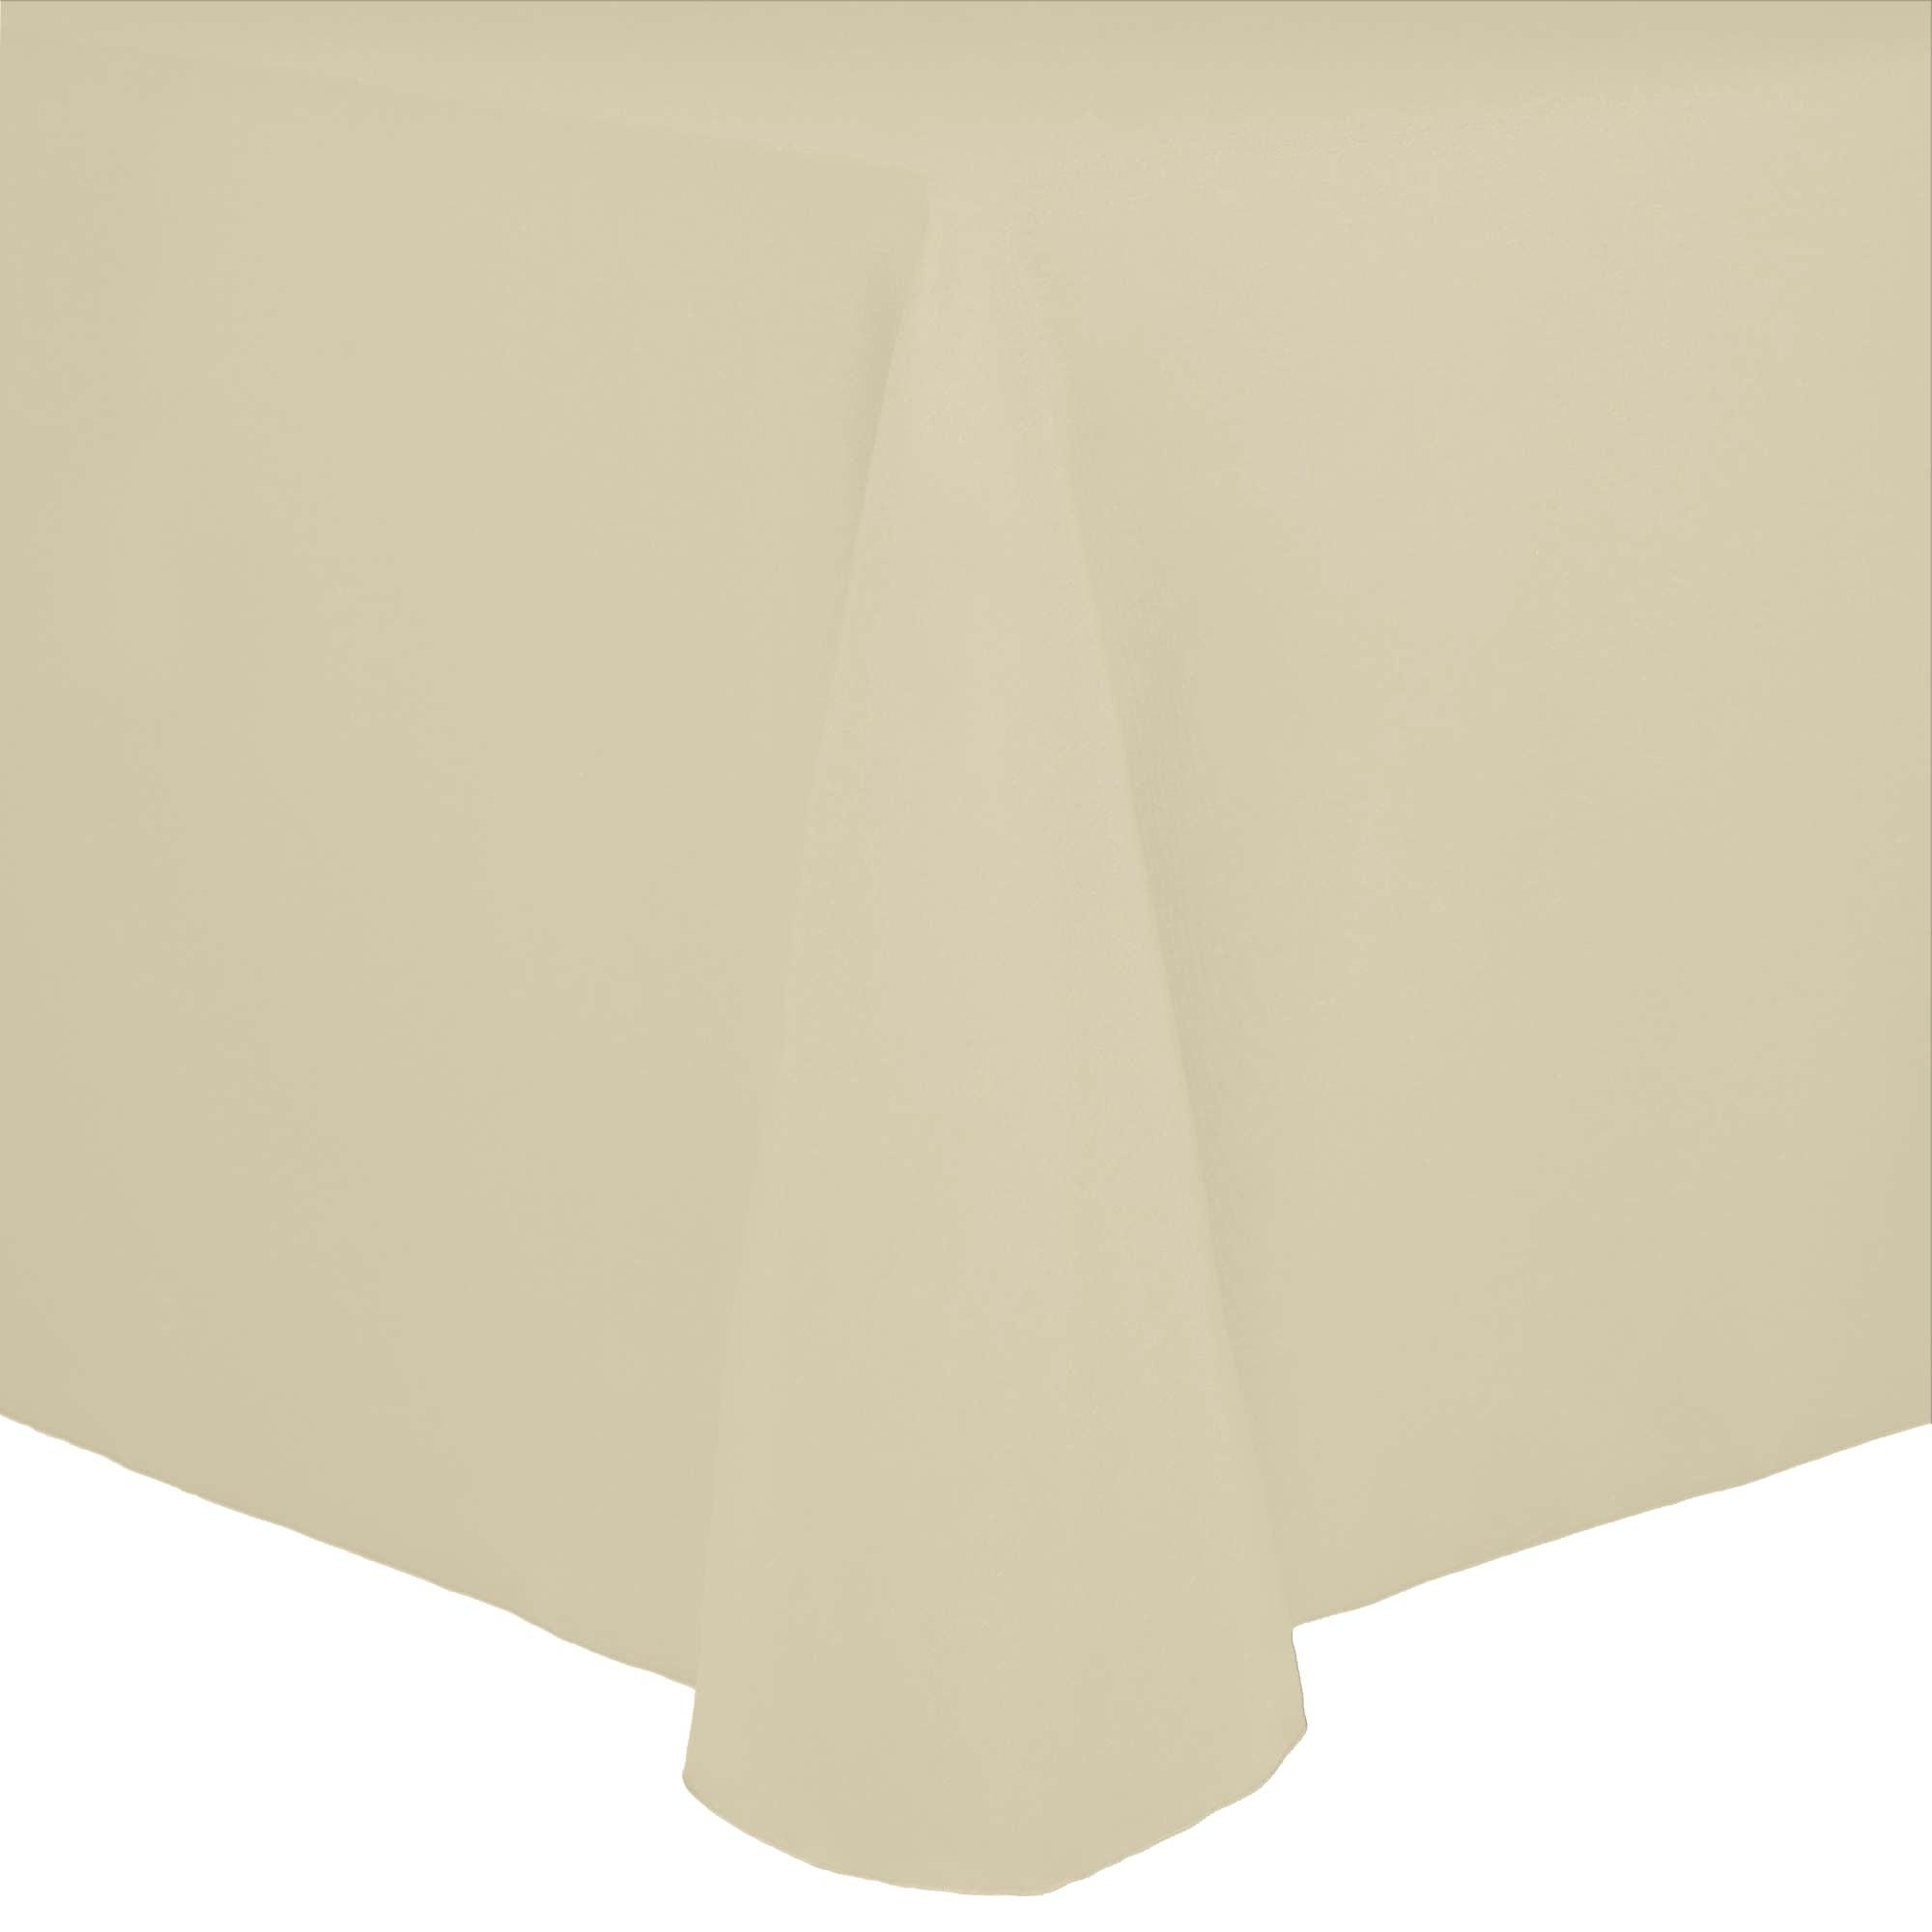 54 Inch Poly Cotton Lining Cream, Cotton Lining